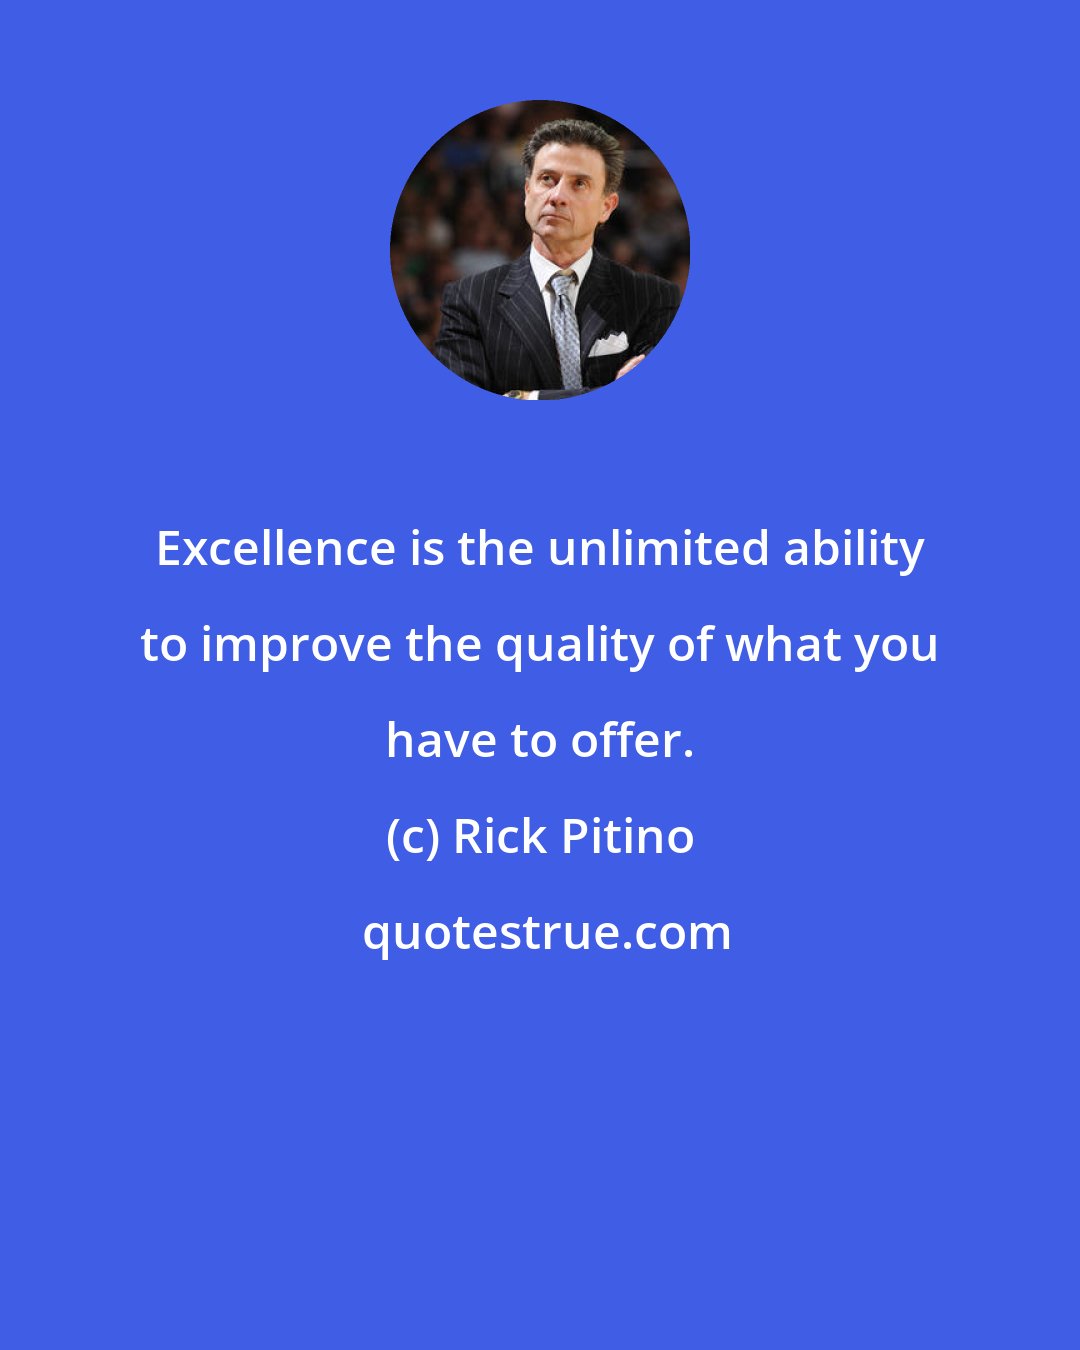 Rick Pitino: Excellence is the unlimited ability to improve the quality of what you have to offer.